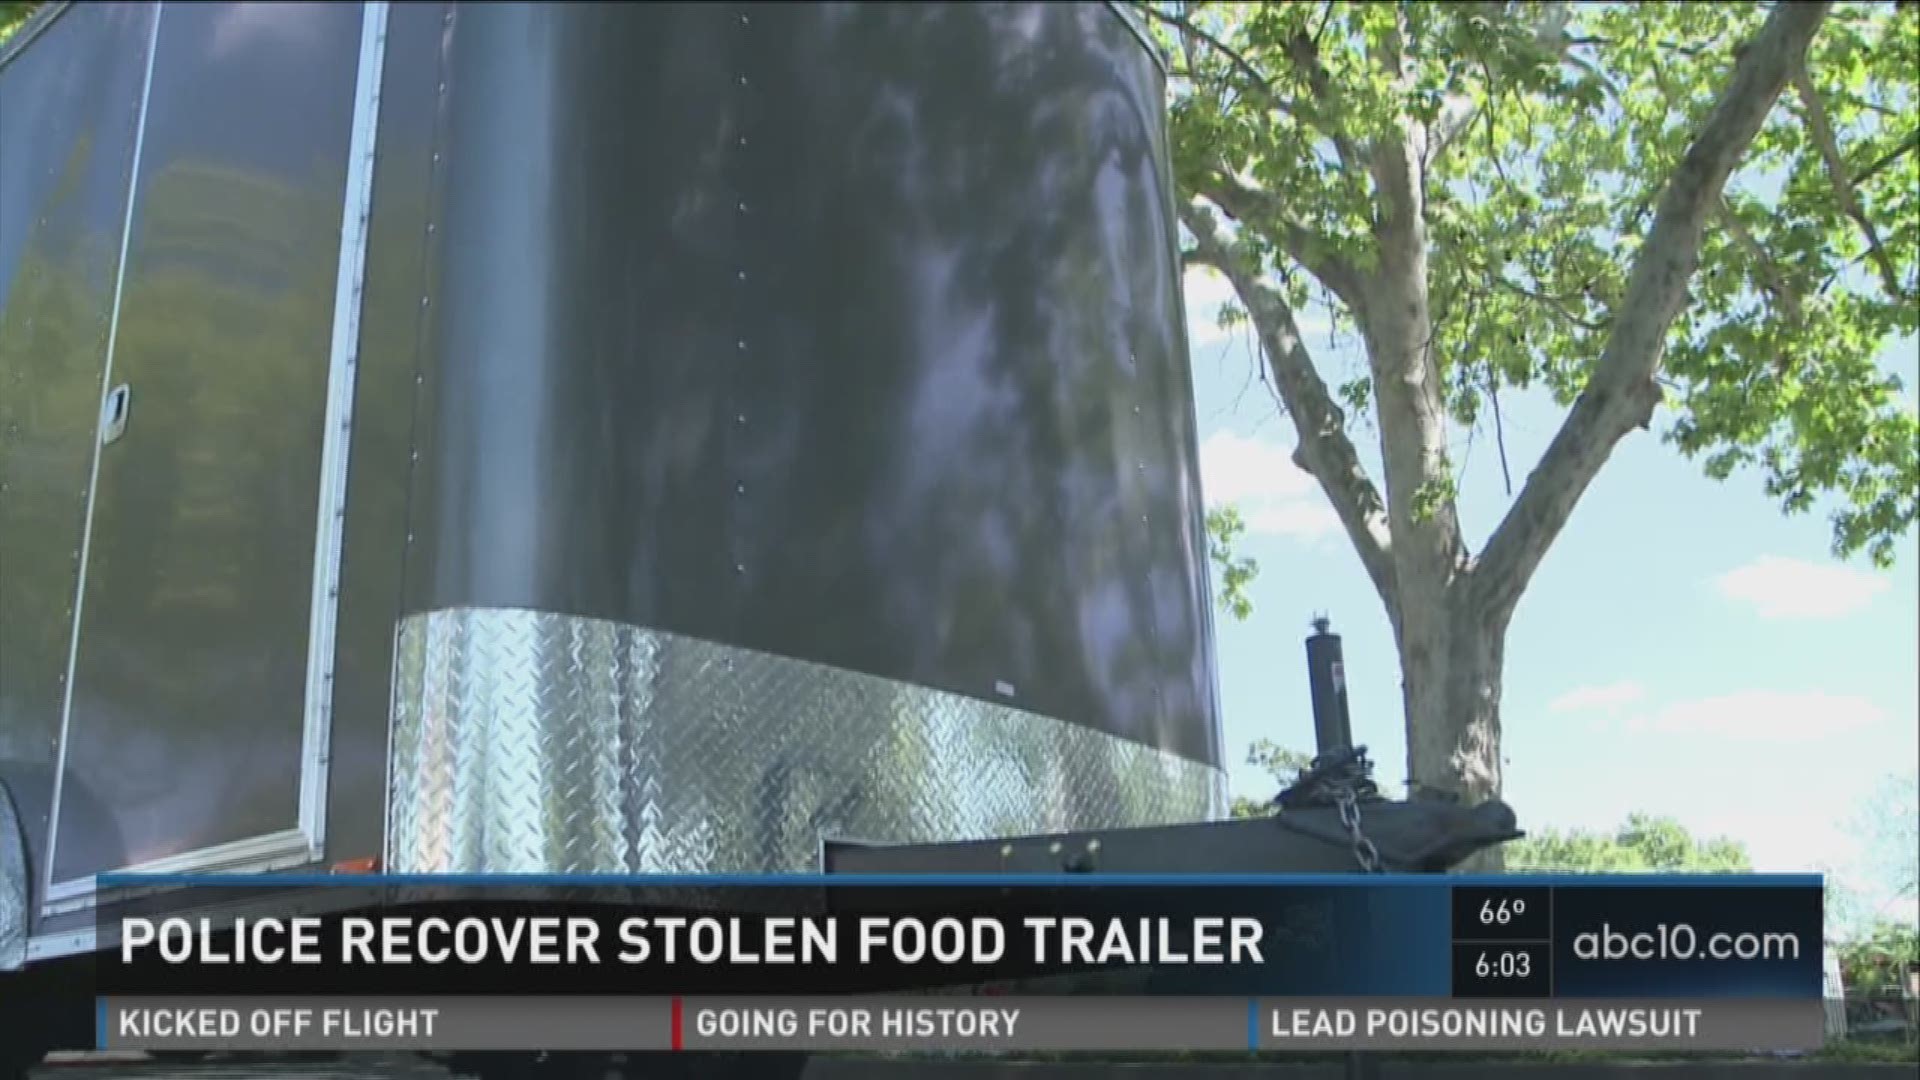 Church recovers trailer stolen in Citrus Heights (April 13, 2016)